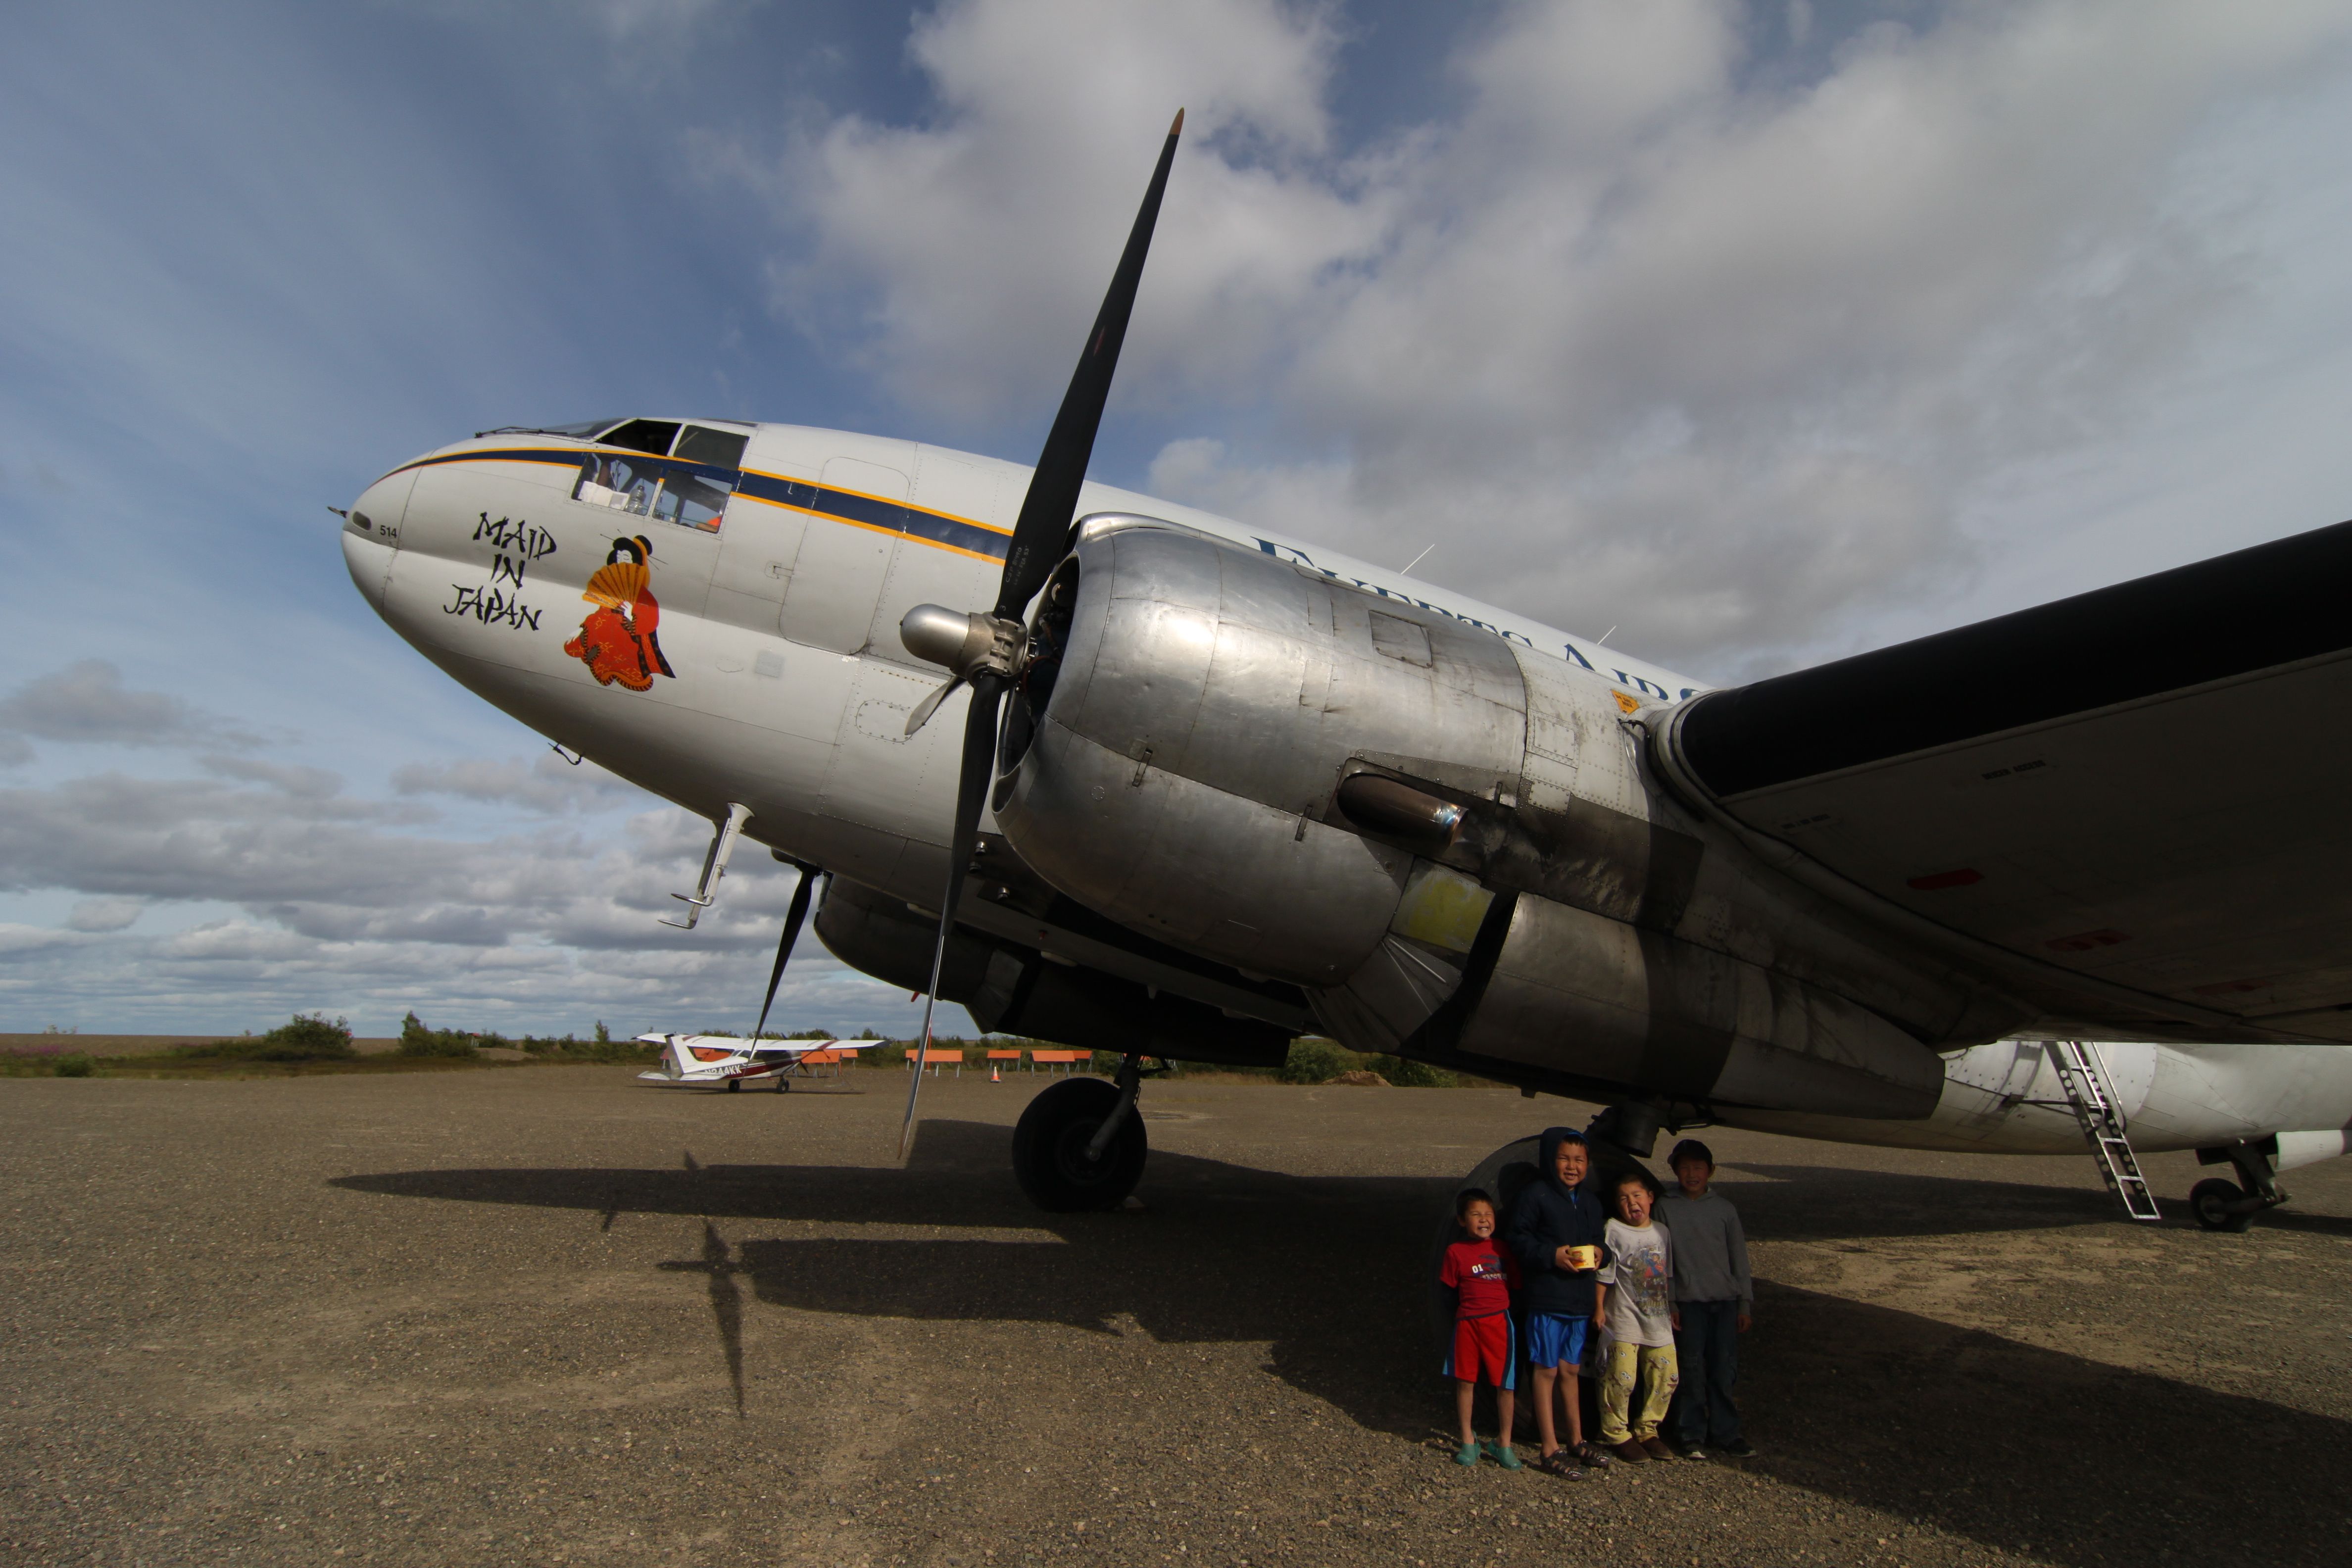 CURTISS Commando (N54514) - The kids at Koliganek, AK were really fun to hang out with for a while!